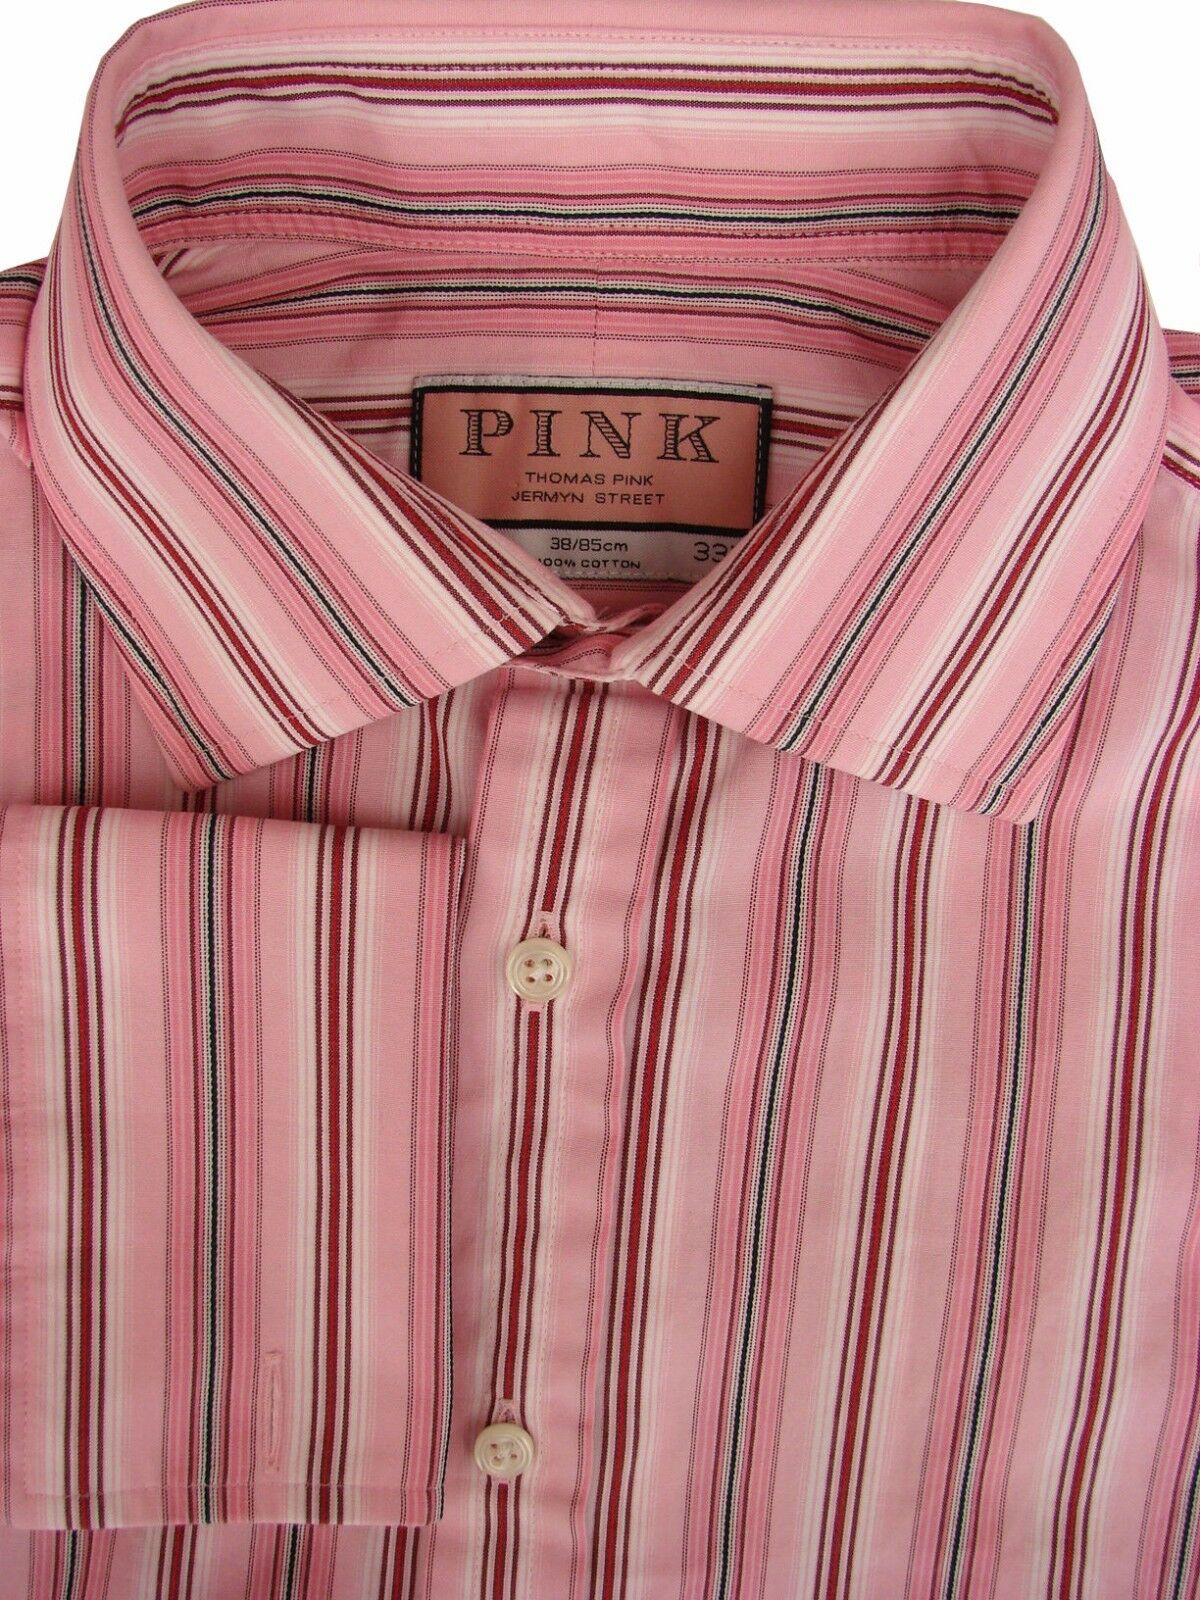 Thomas pink mens shirts section view from the bottom left hand